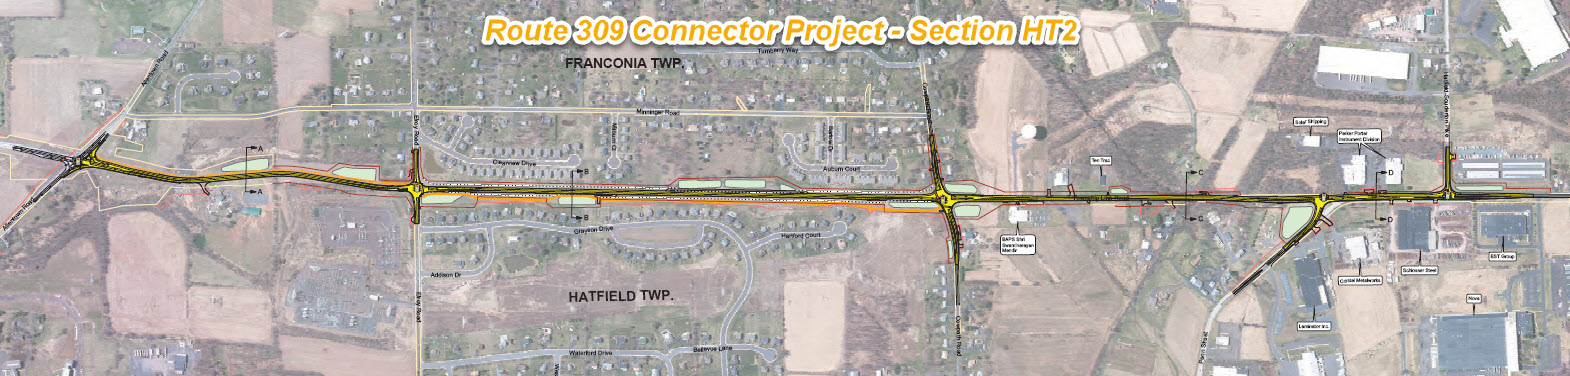 Route 309 Connector Project - Section HT2.jpg